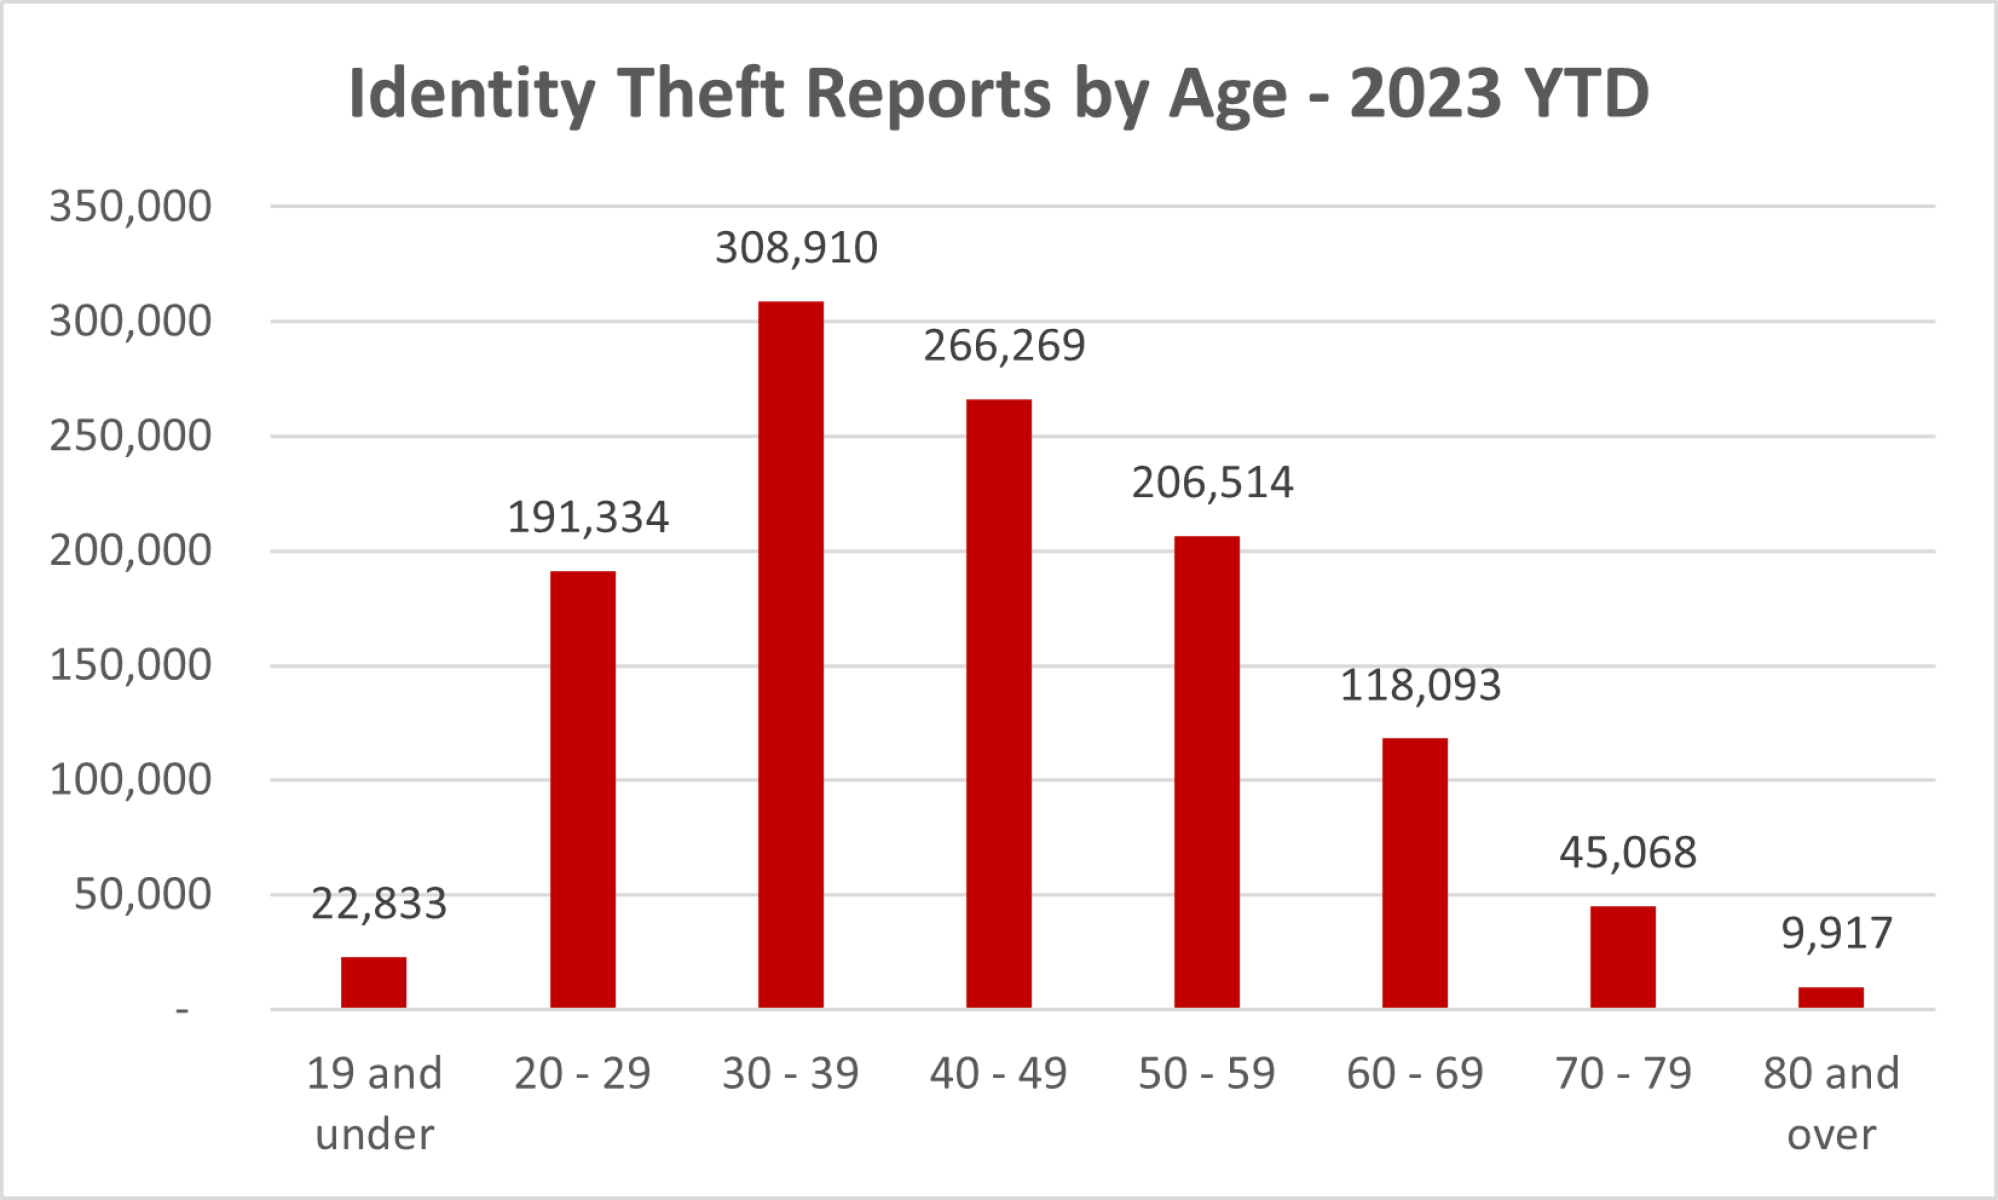 Identity Theft Reports by Age - 2023 YTD